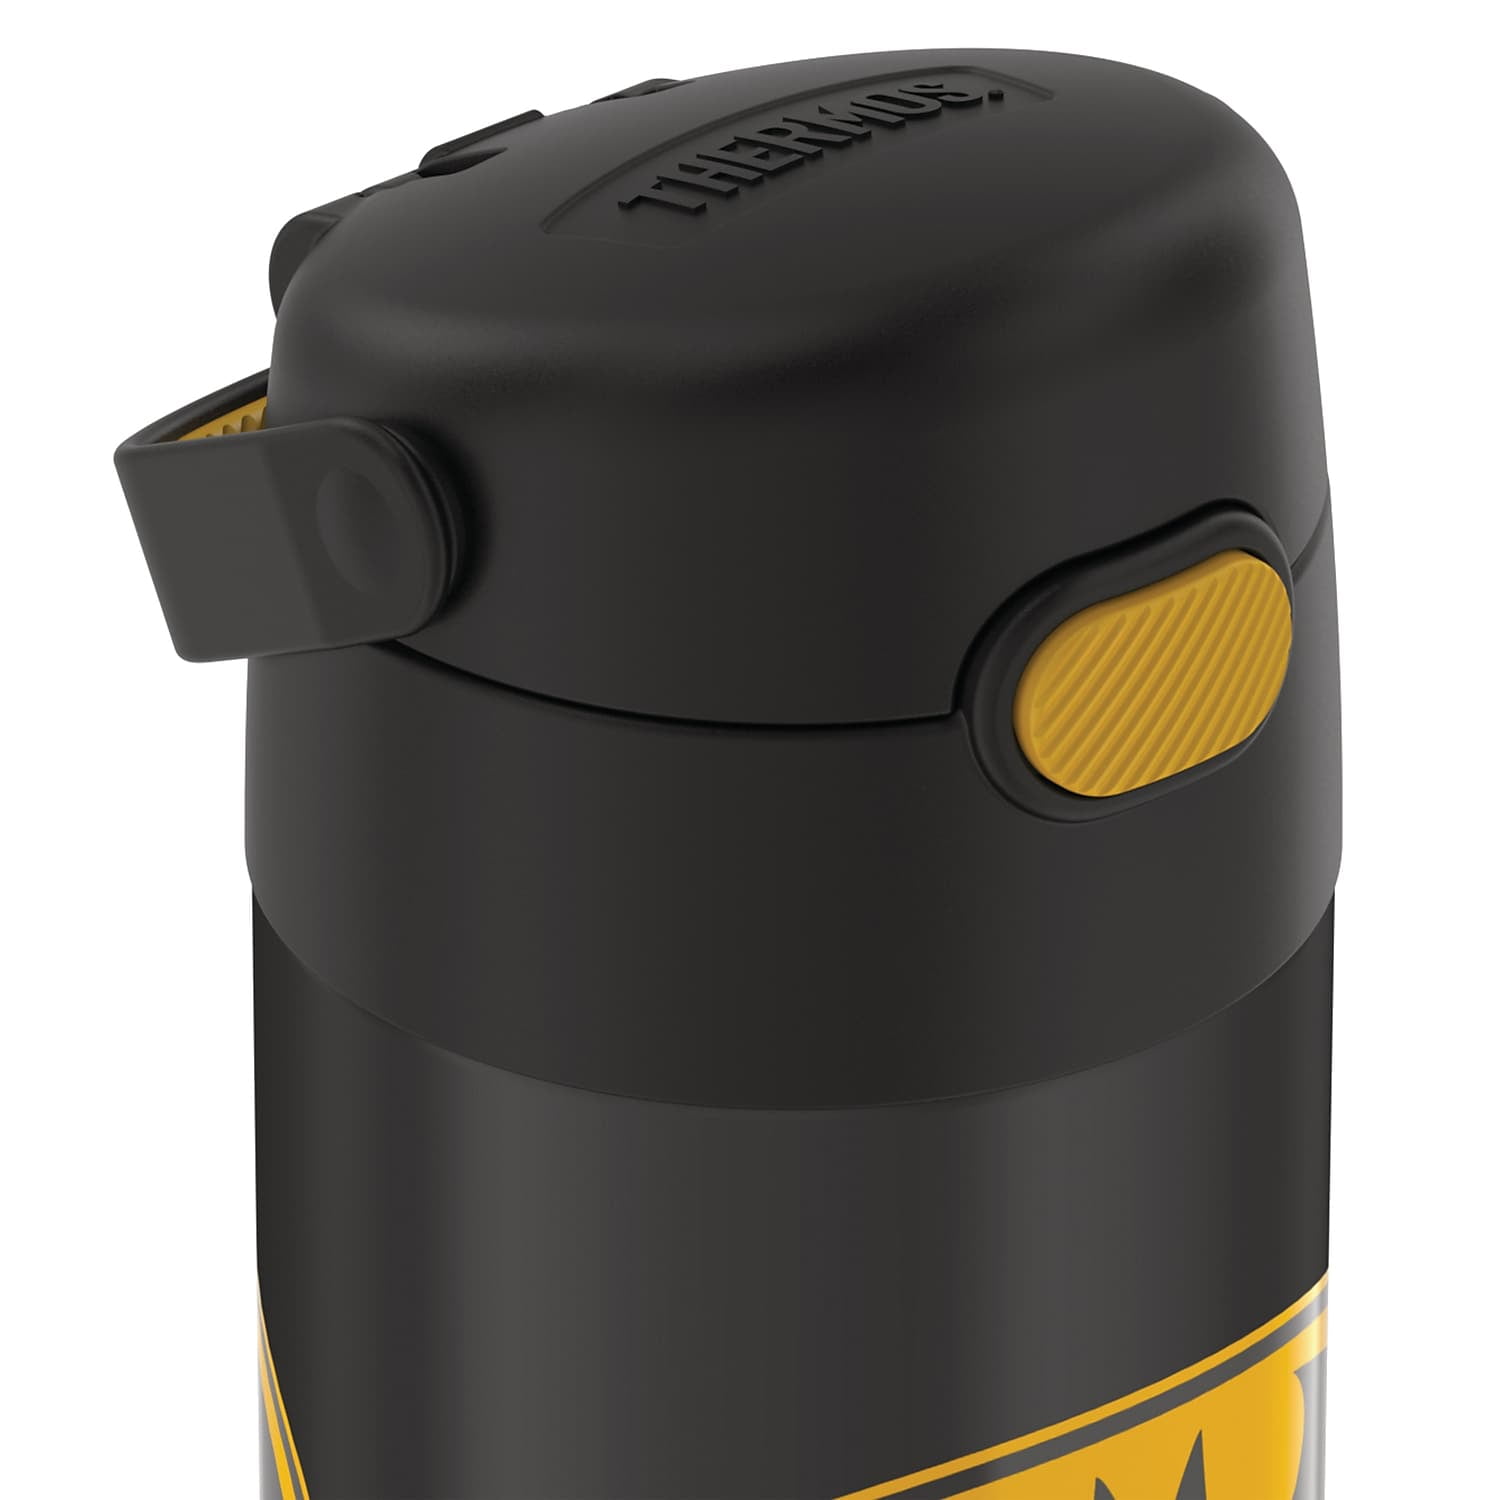 Thermos Funtainer Batman Food Jar Only $10.88 (Regularly $18)